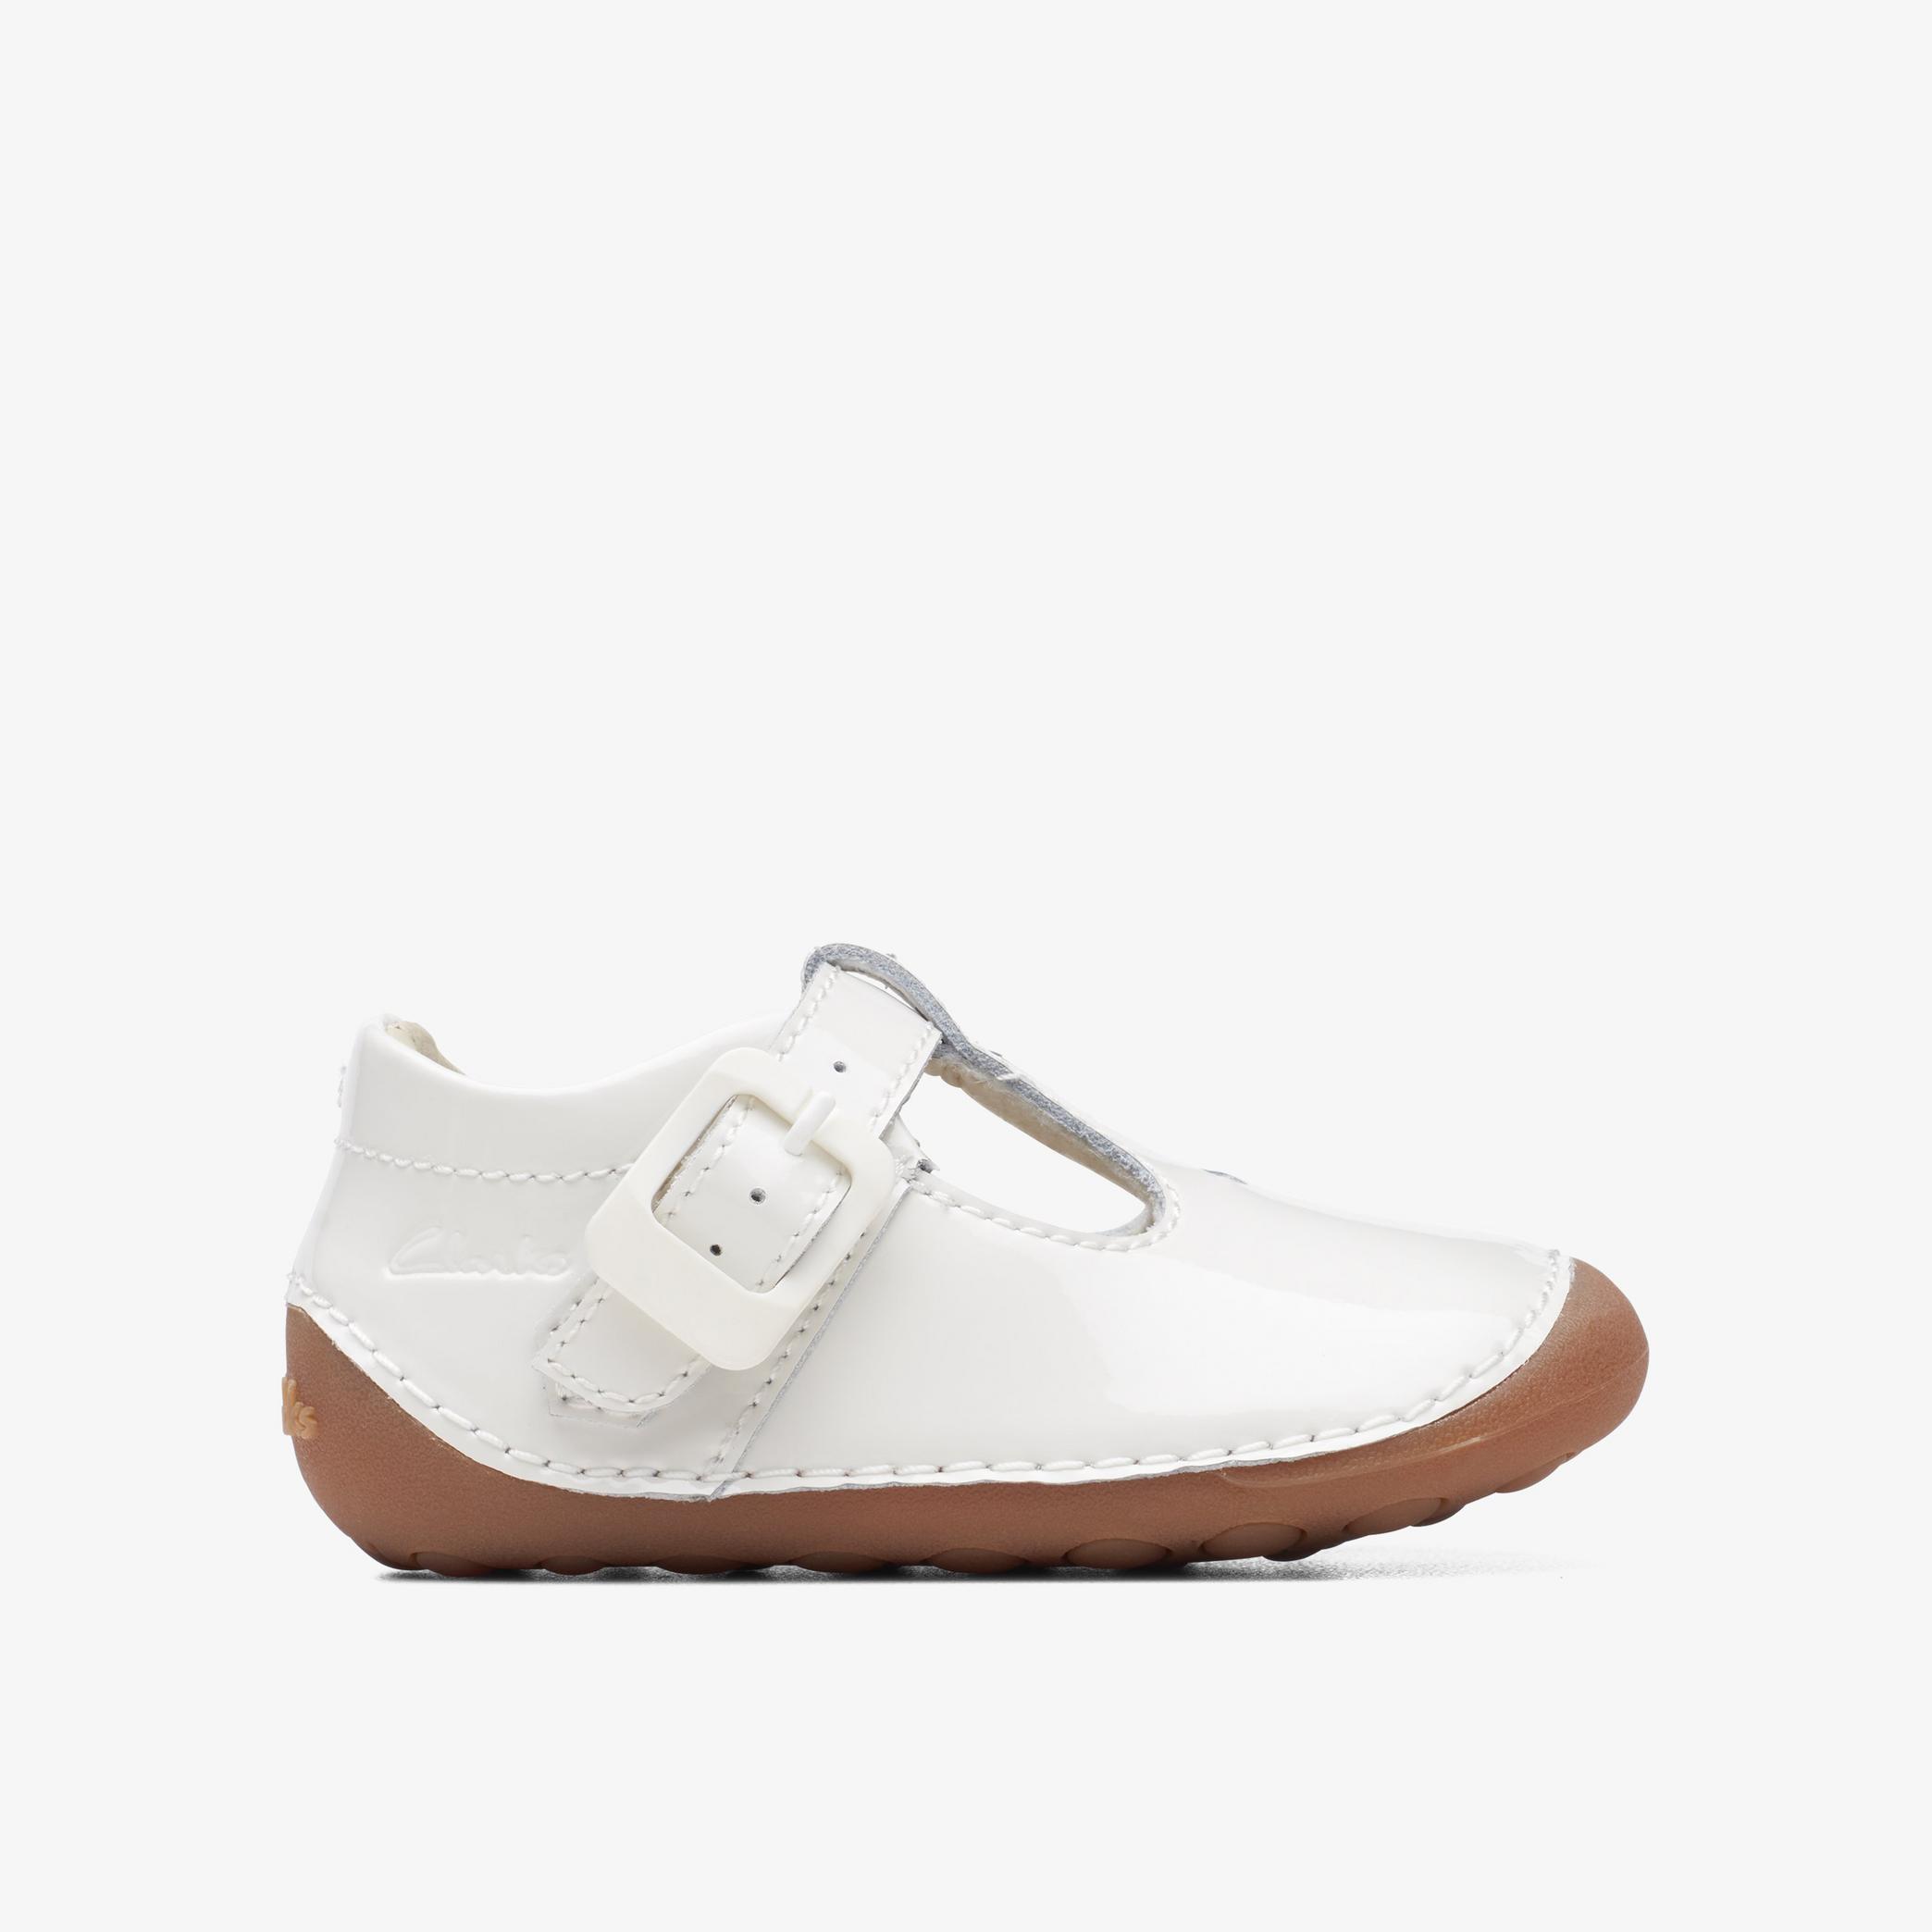 Tiny Beat Toddler White Patent T Bar Shoes, view 1 of 6